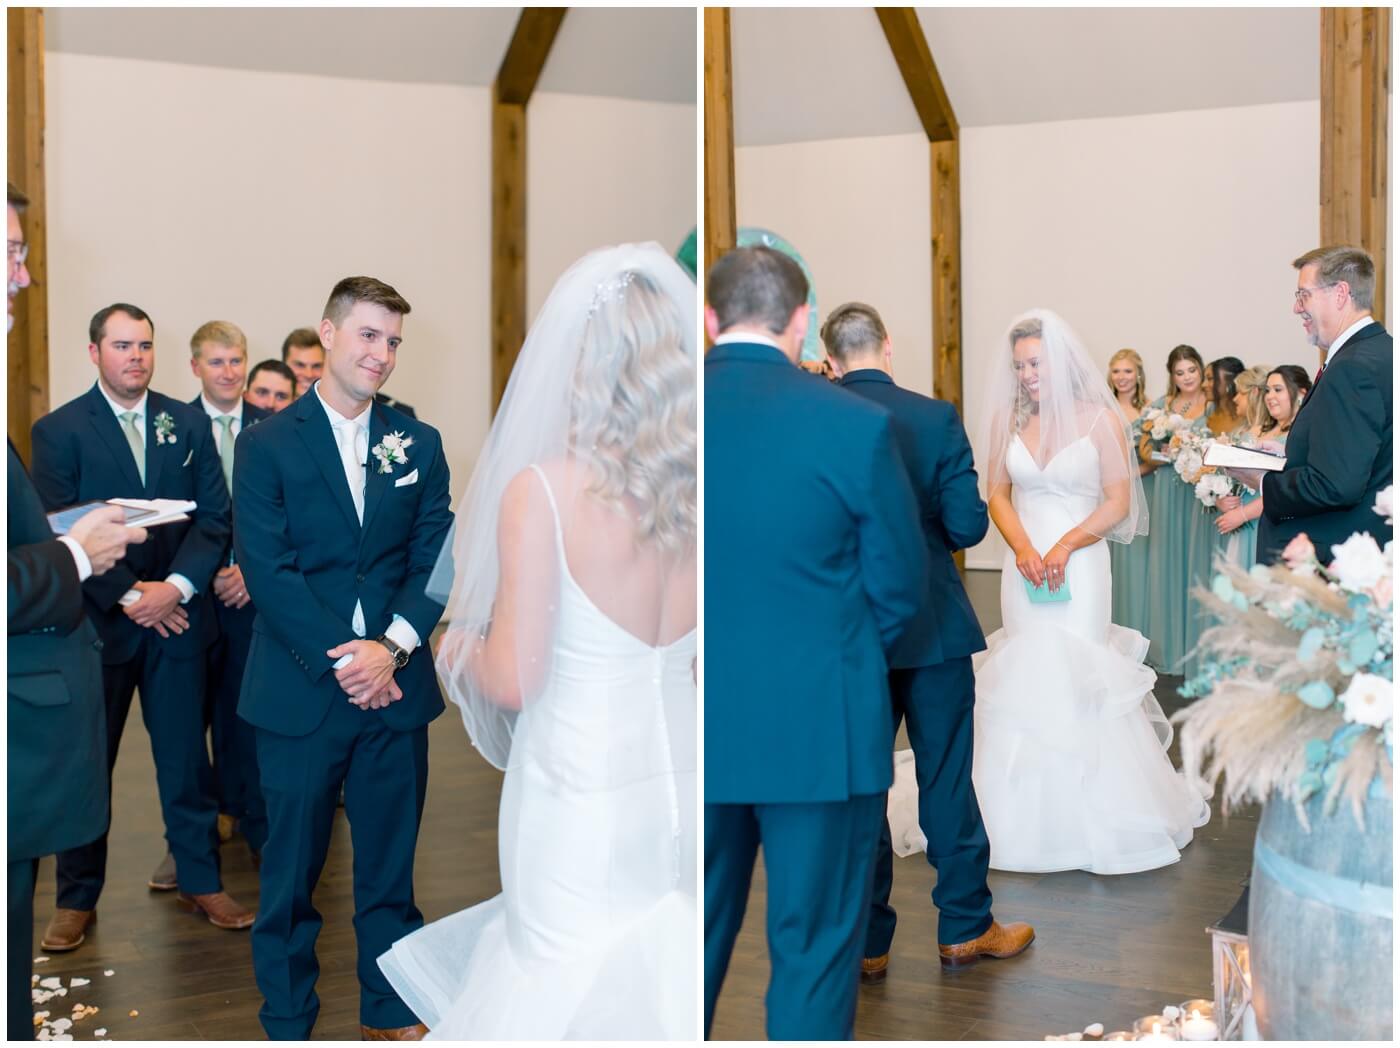 Houston Wedding at The Vine | the bride an groom smile as they exchange vows 